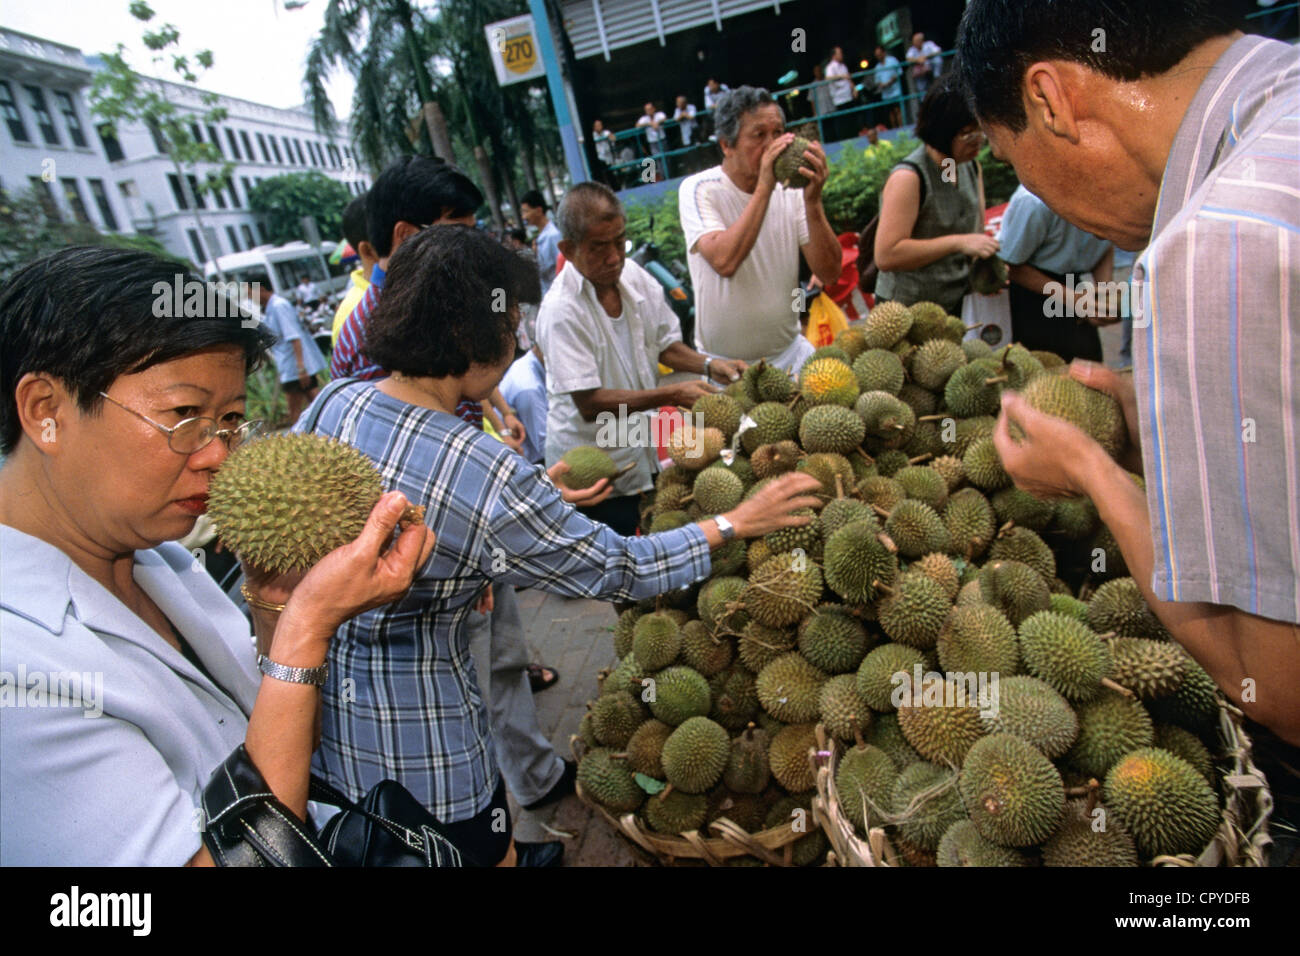 Singapore, Bugis market, pile of durians on the stall in the street Stock Photo